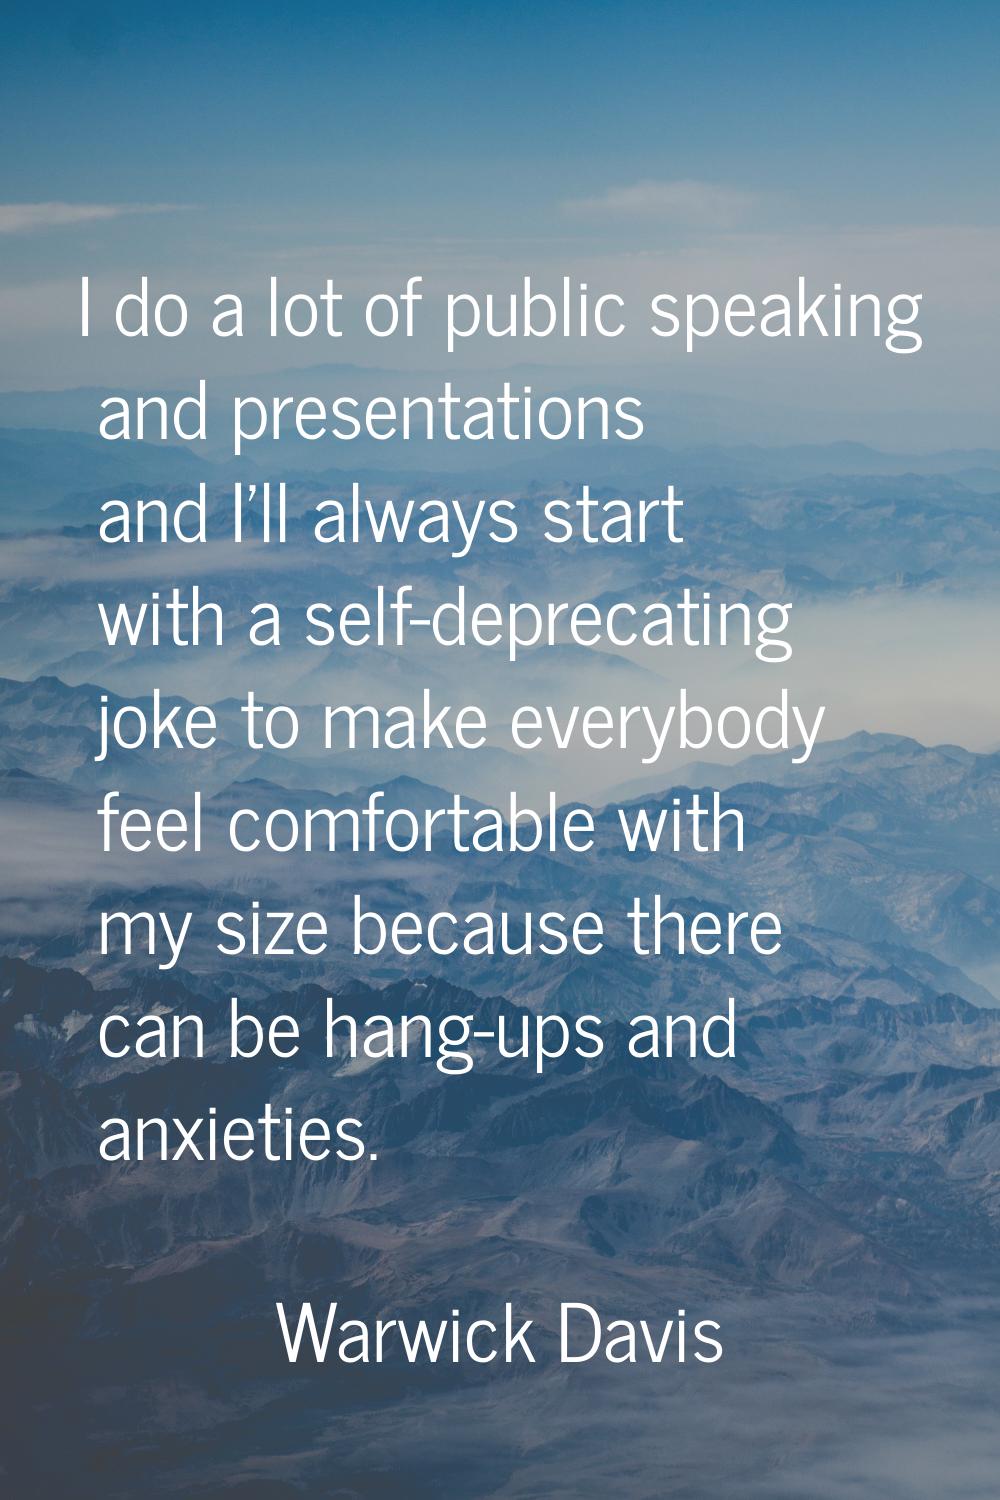 I do a lot of public speaking and presentations and I'll always start with a self-deprecating joke 